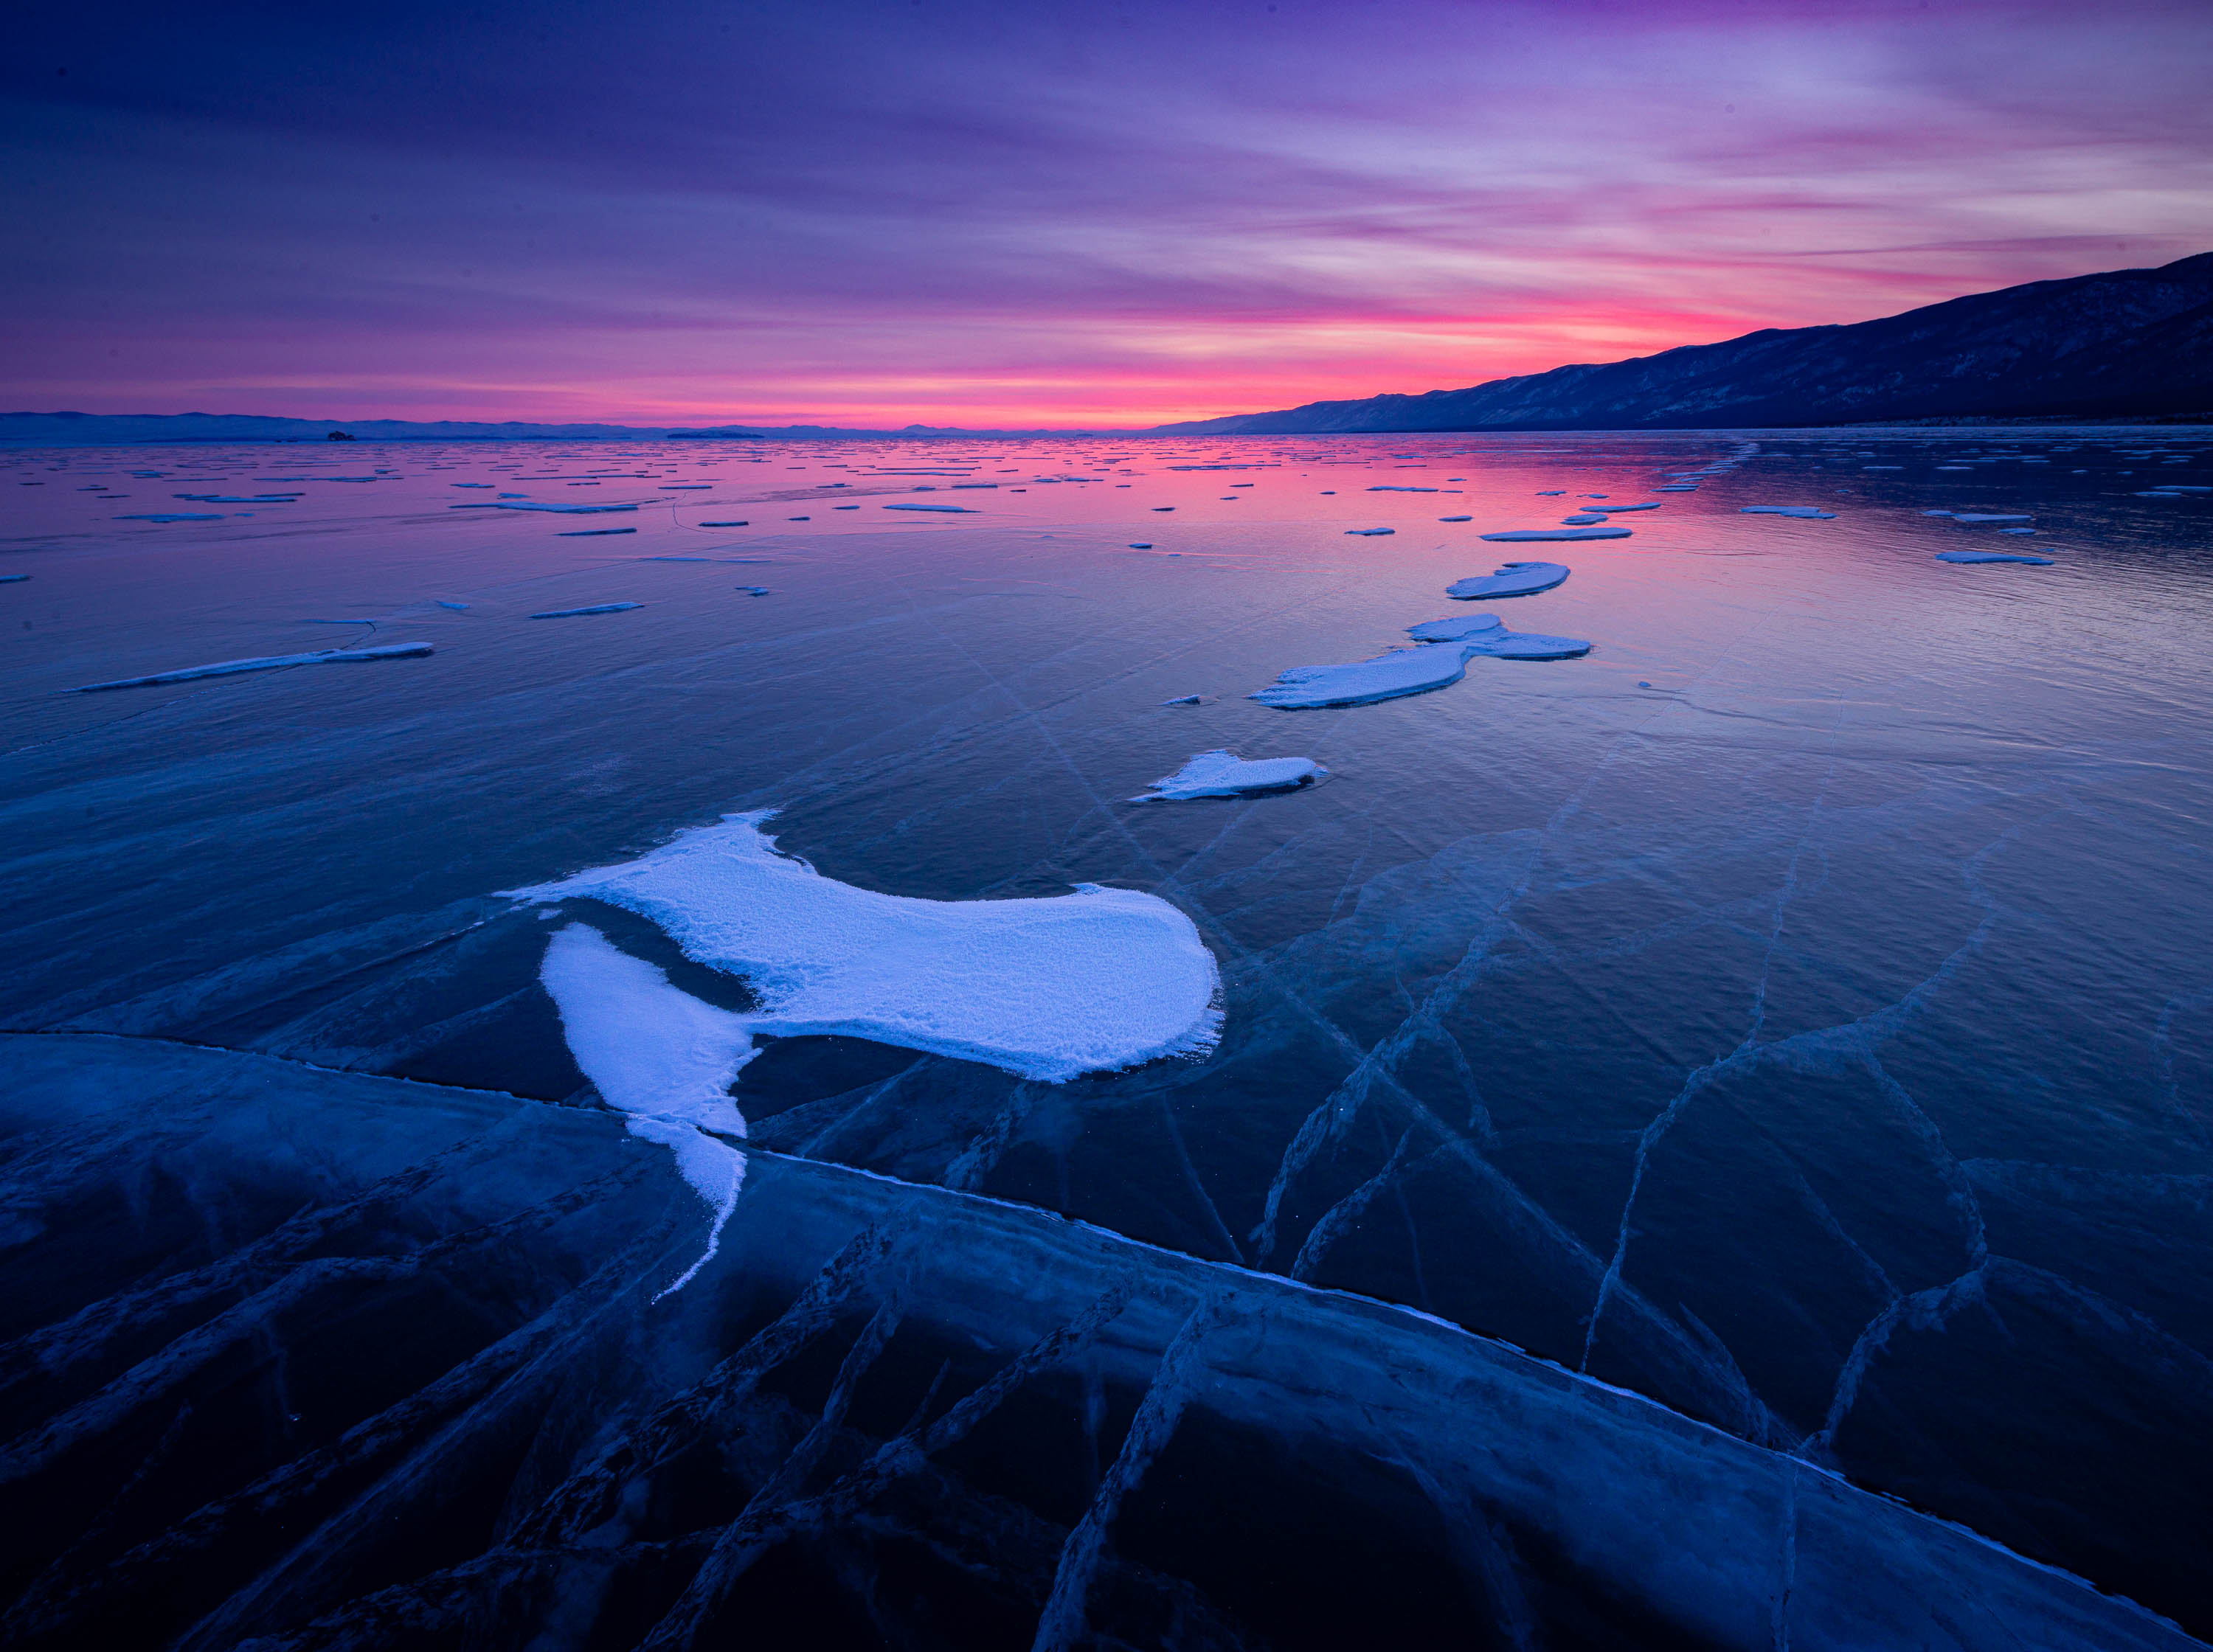 A frozen lake with some fresh snow, and a pinkish effect in the background, Lake Baikal #33, Siberia, Russia